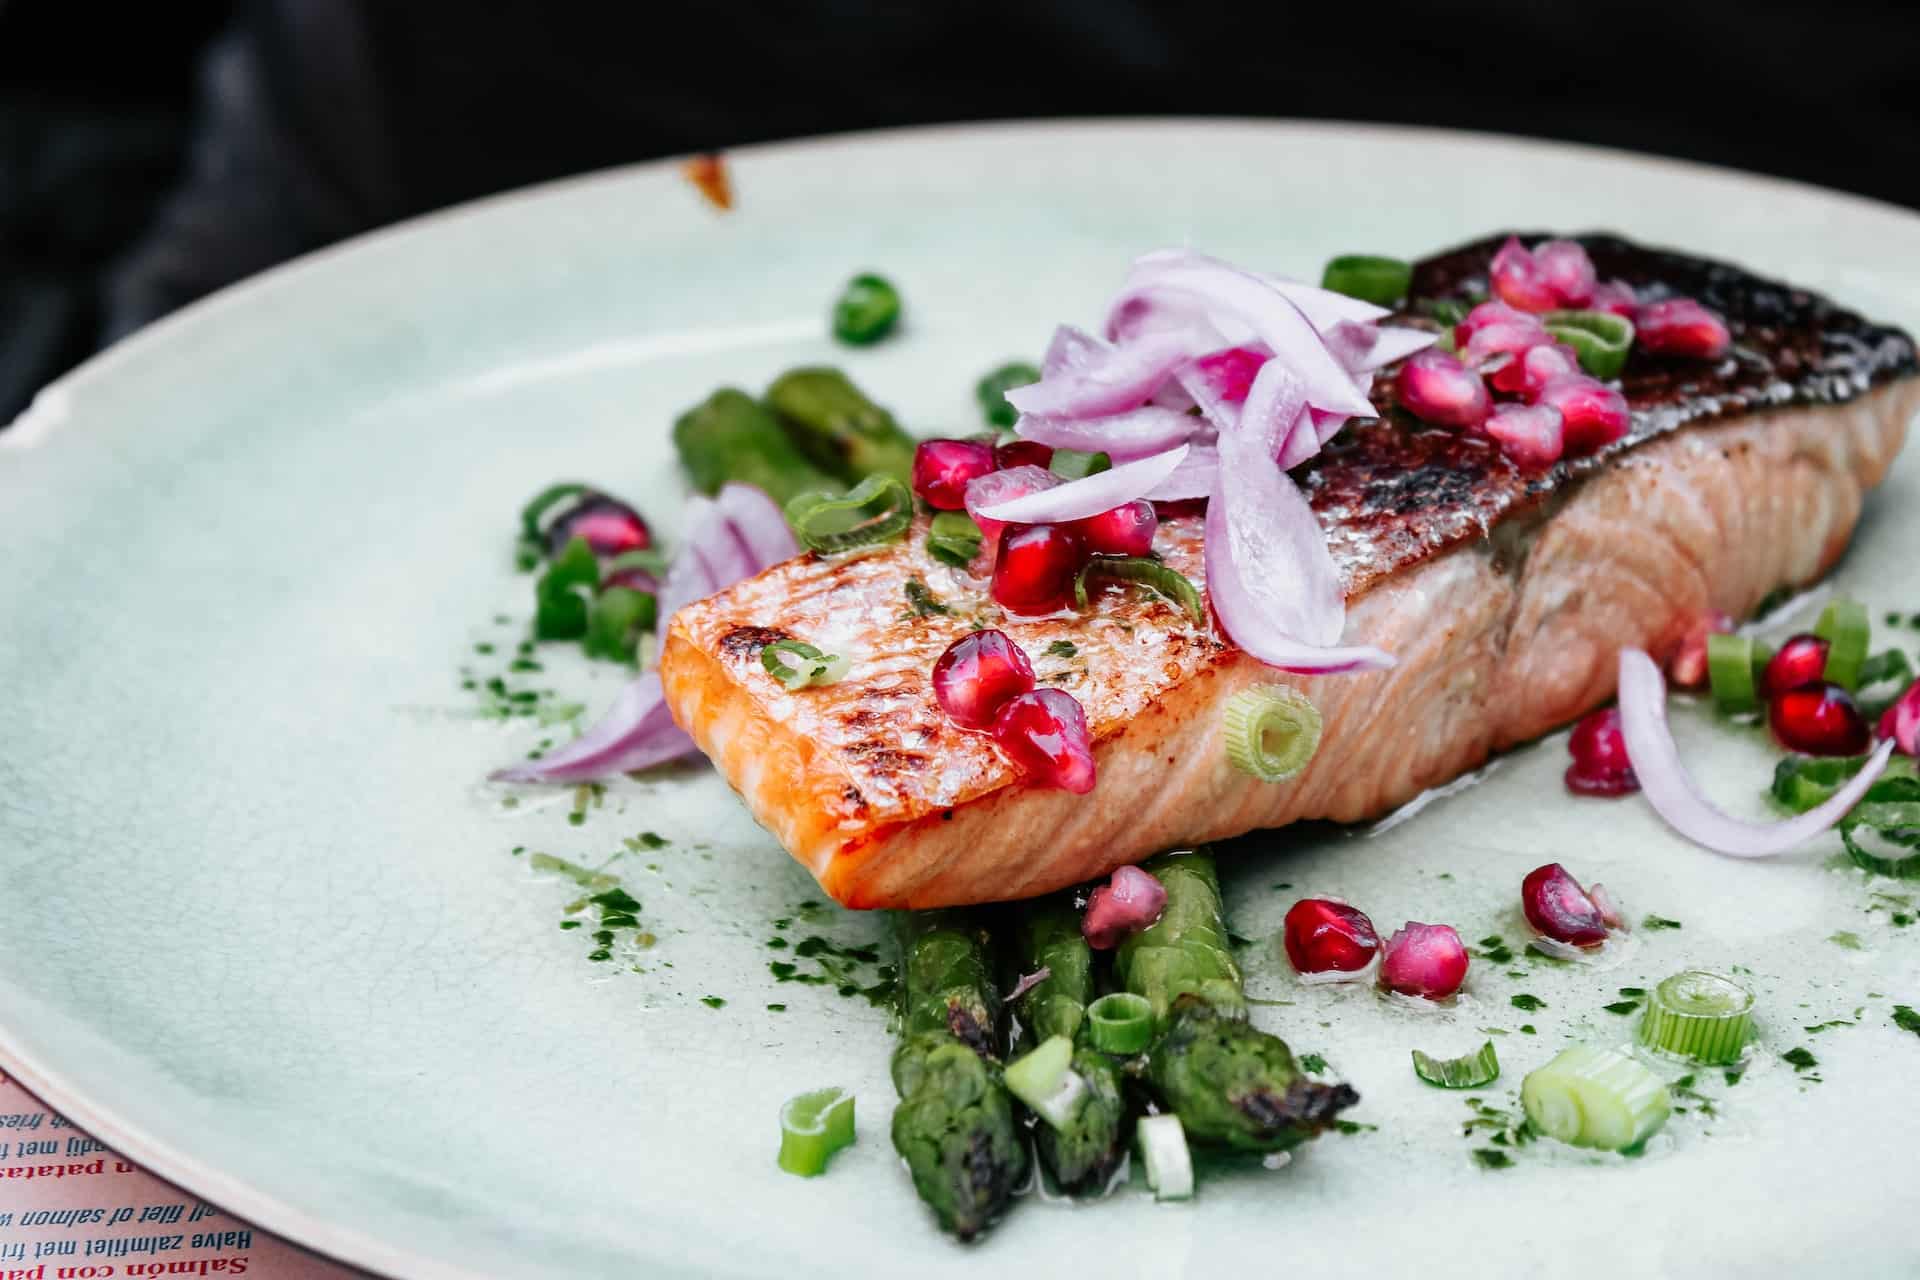 Salmon fillet with colorful vegetable garnishes on a white plate